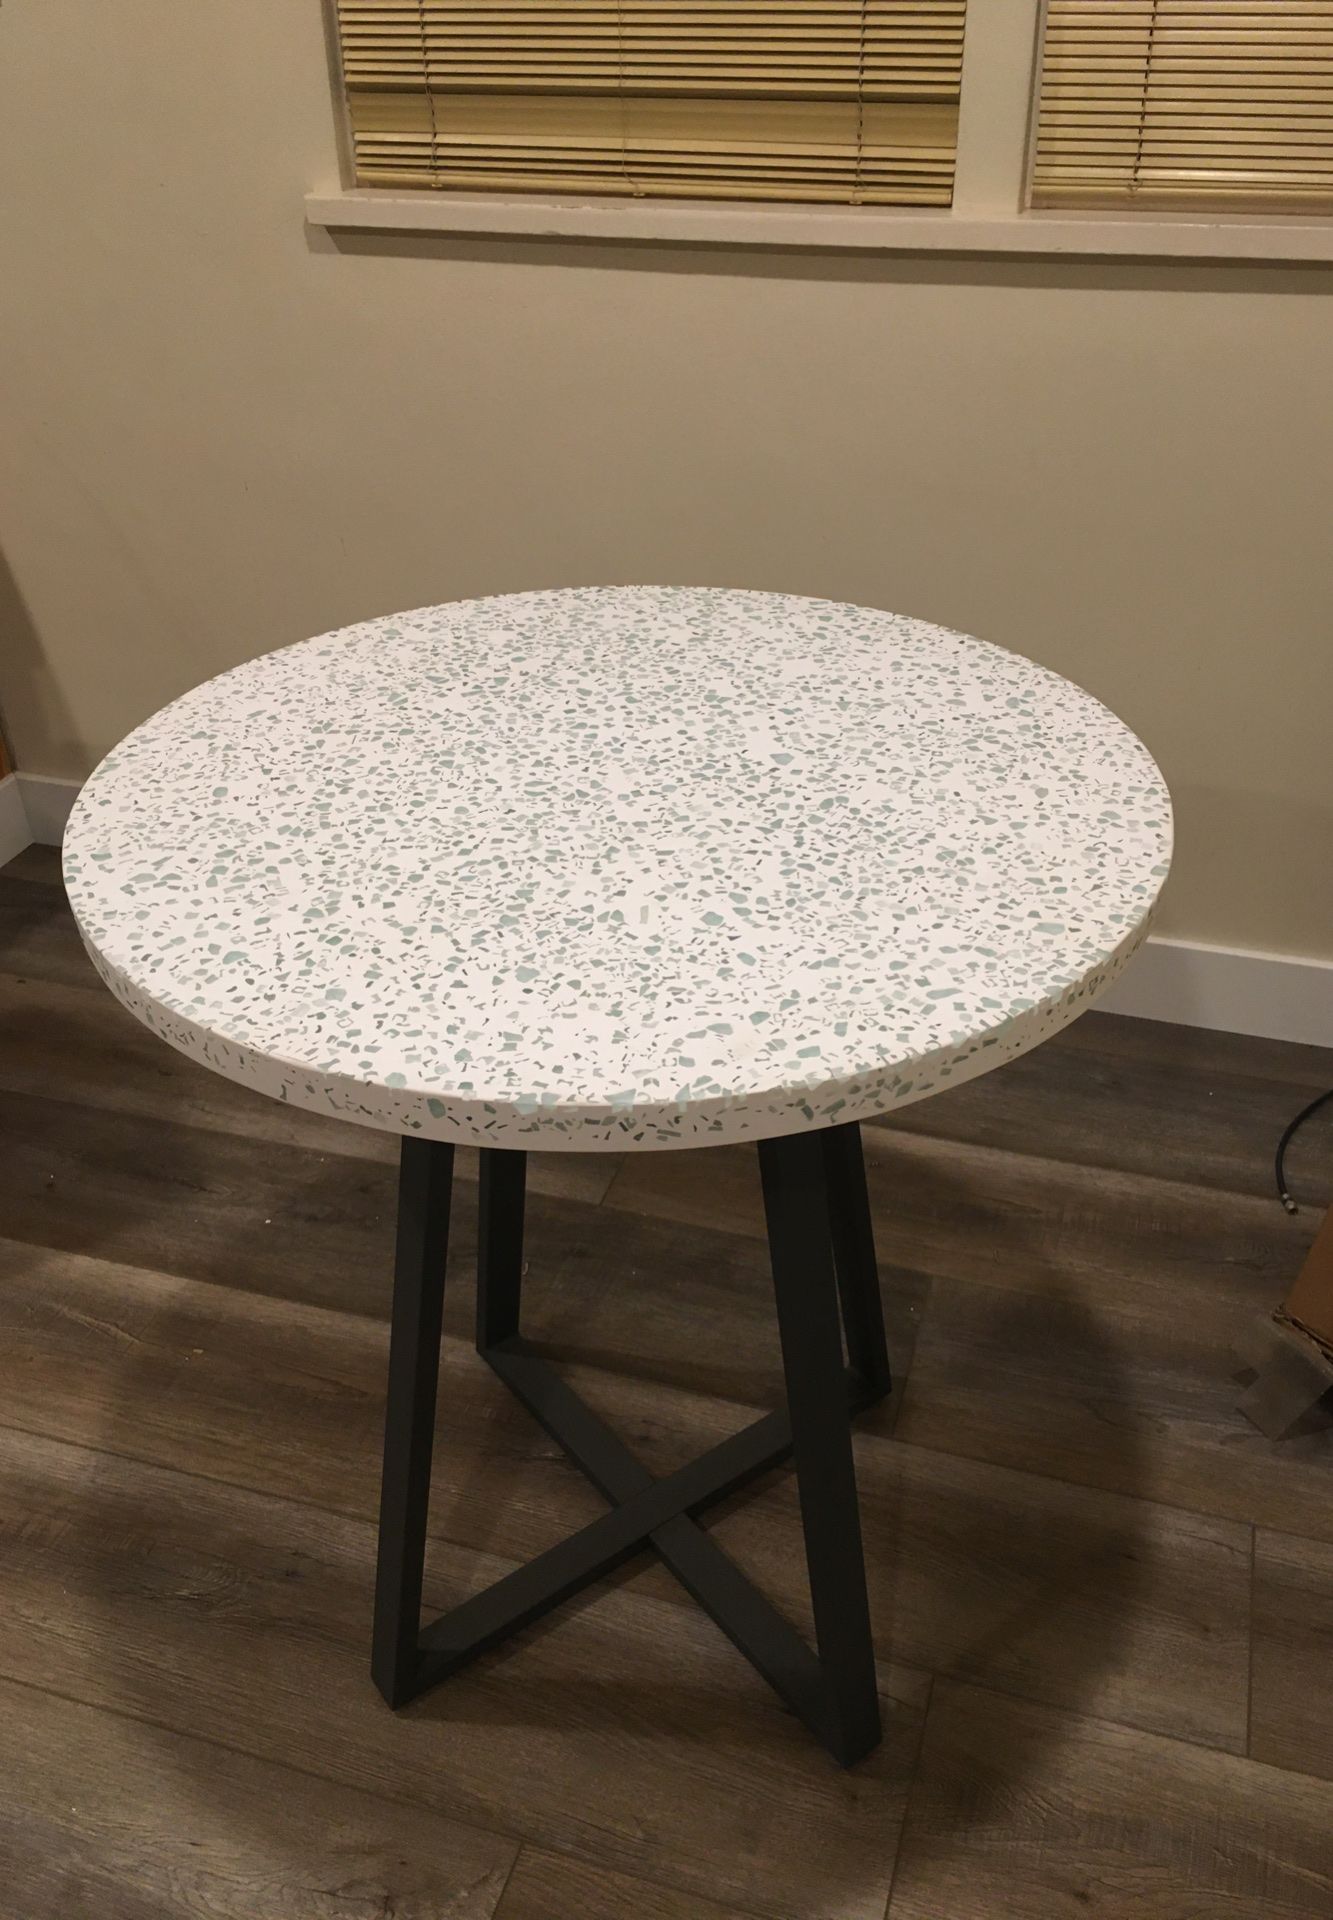 New small kitchen table from World Market